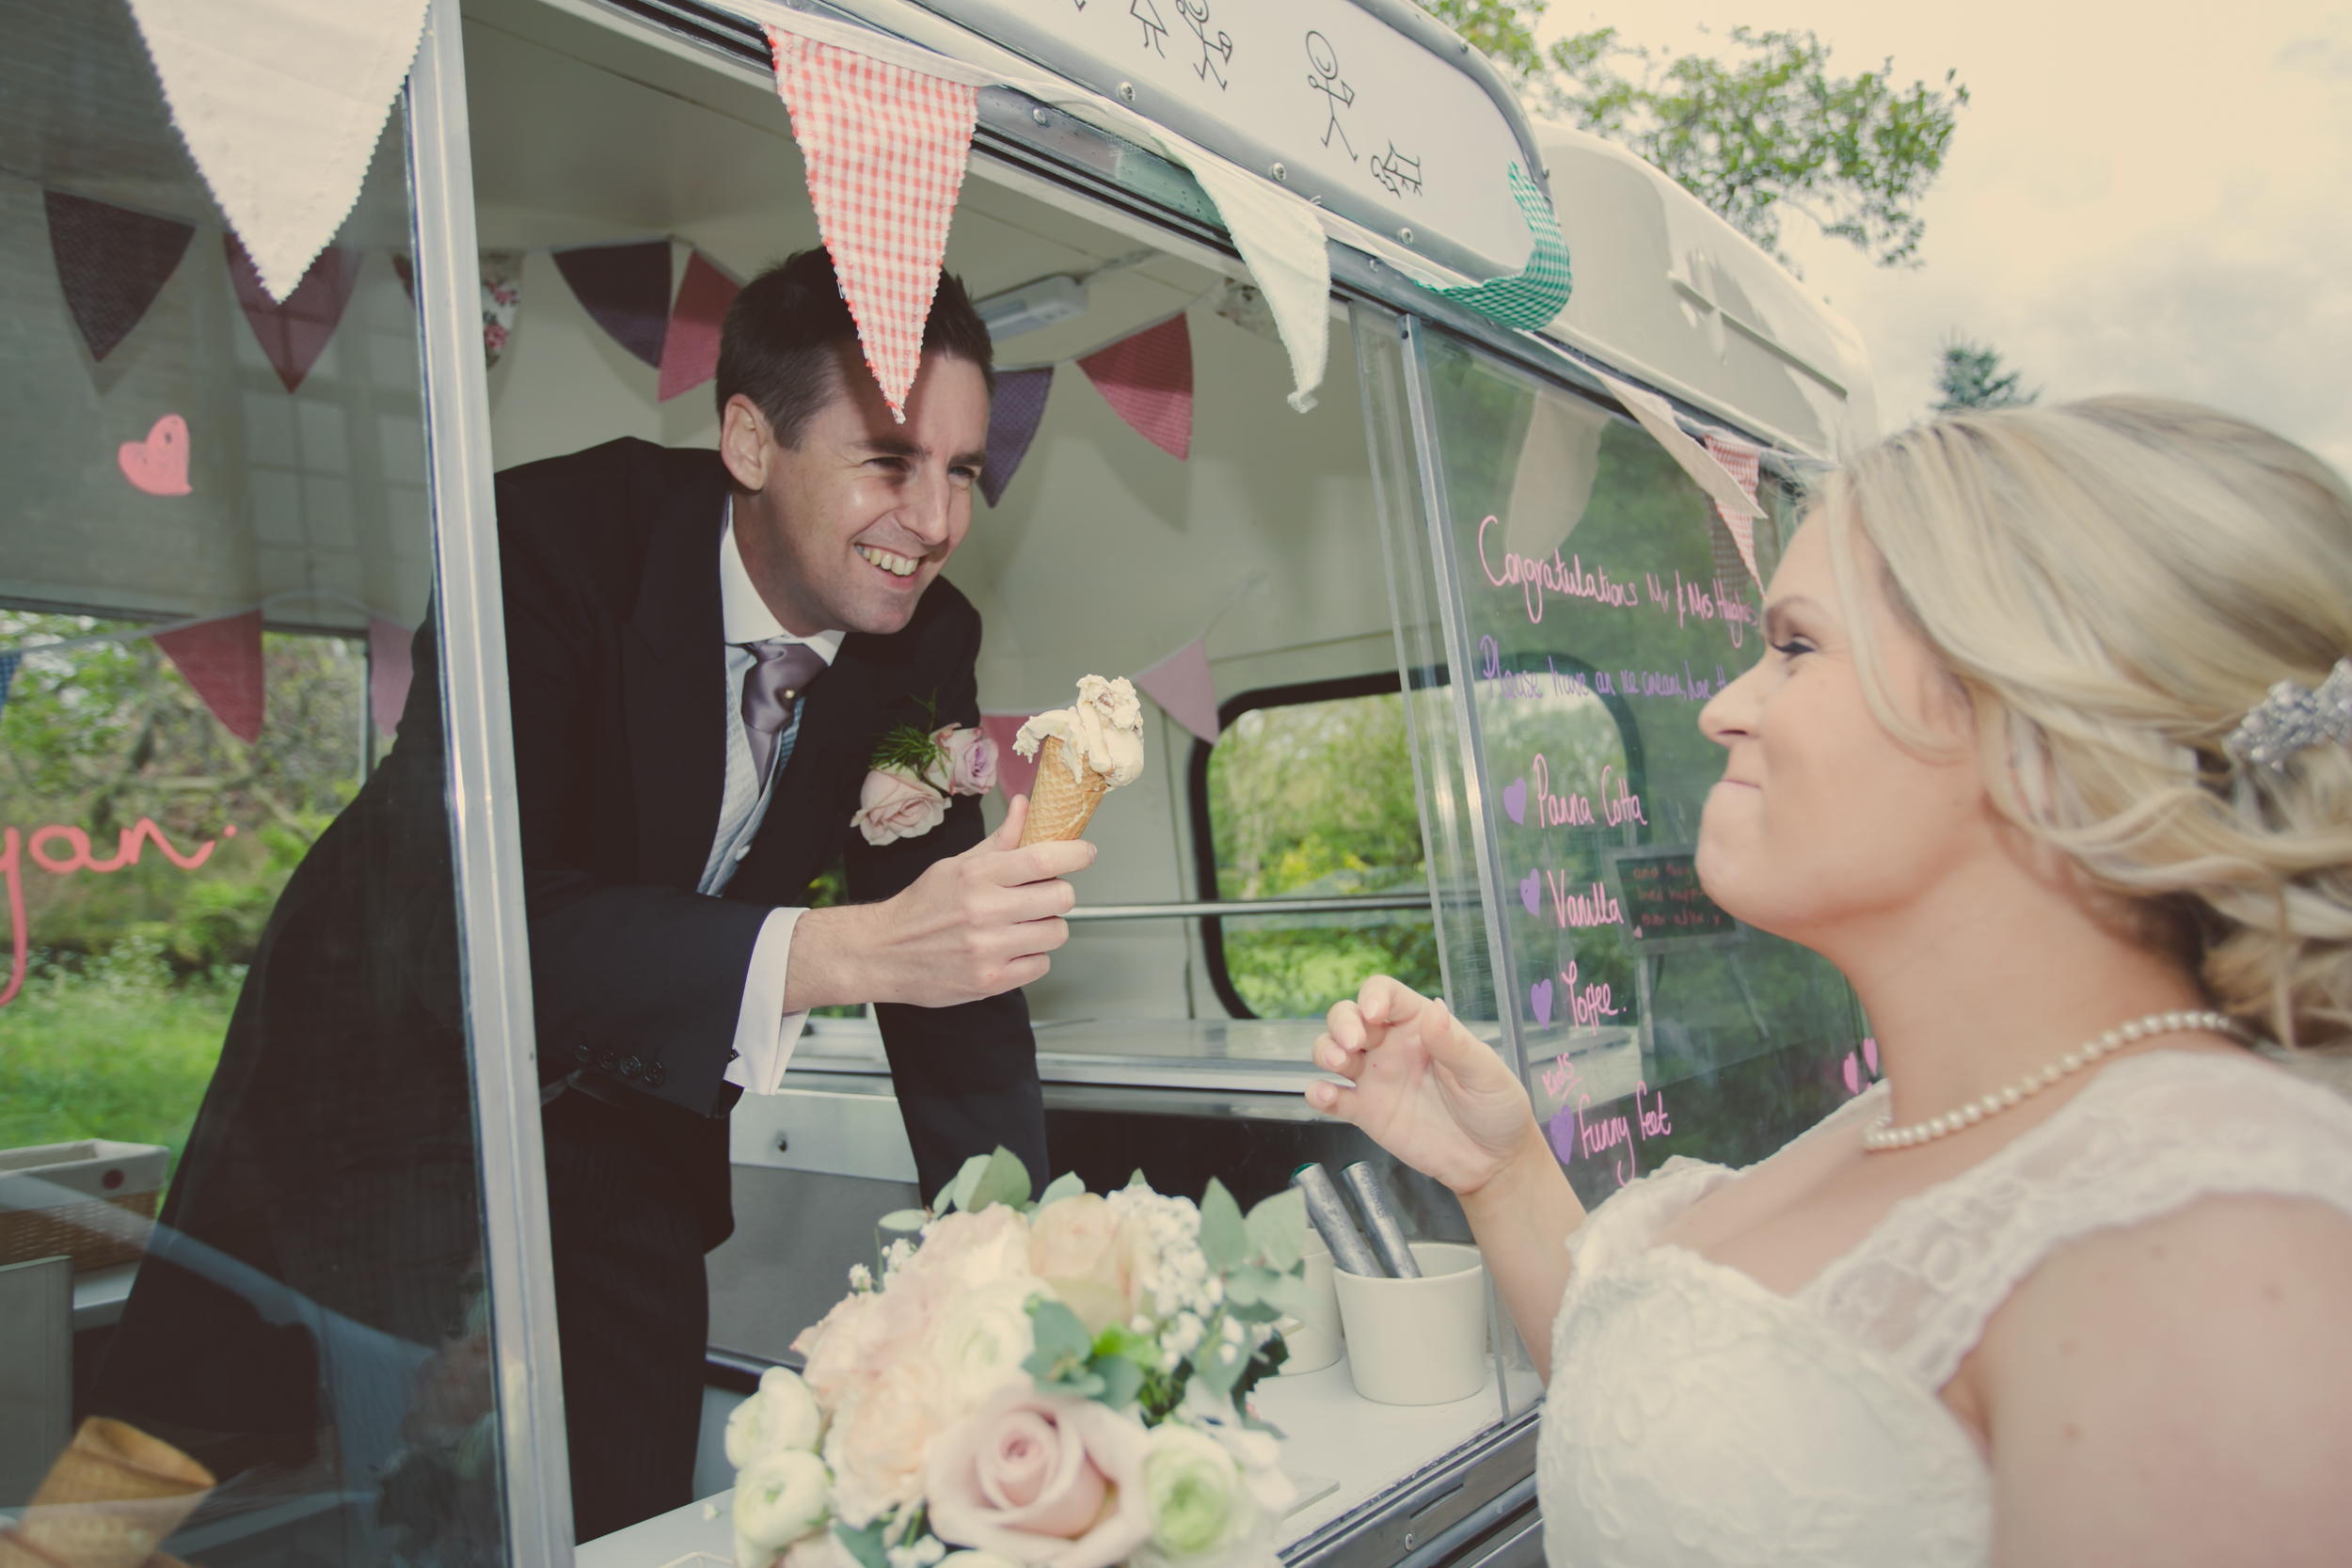 011 - Betsy's Vintage Ice Cream Van www.betsysemporium.com - Choe and Ryan's Fine Art Wedding Photography by Pamela and Mark Pugh Team MP www.markpugh.com - SOCIAL MEDIA IMAGE - Do NOT edit this image without consent -0536.JPG